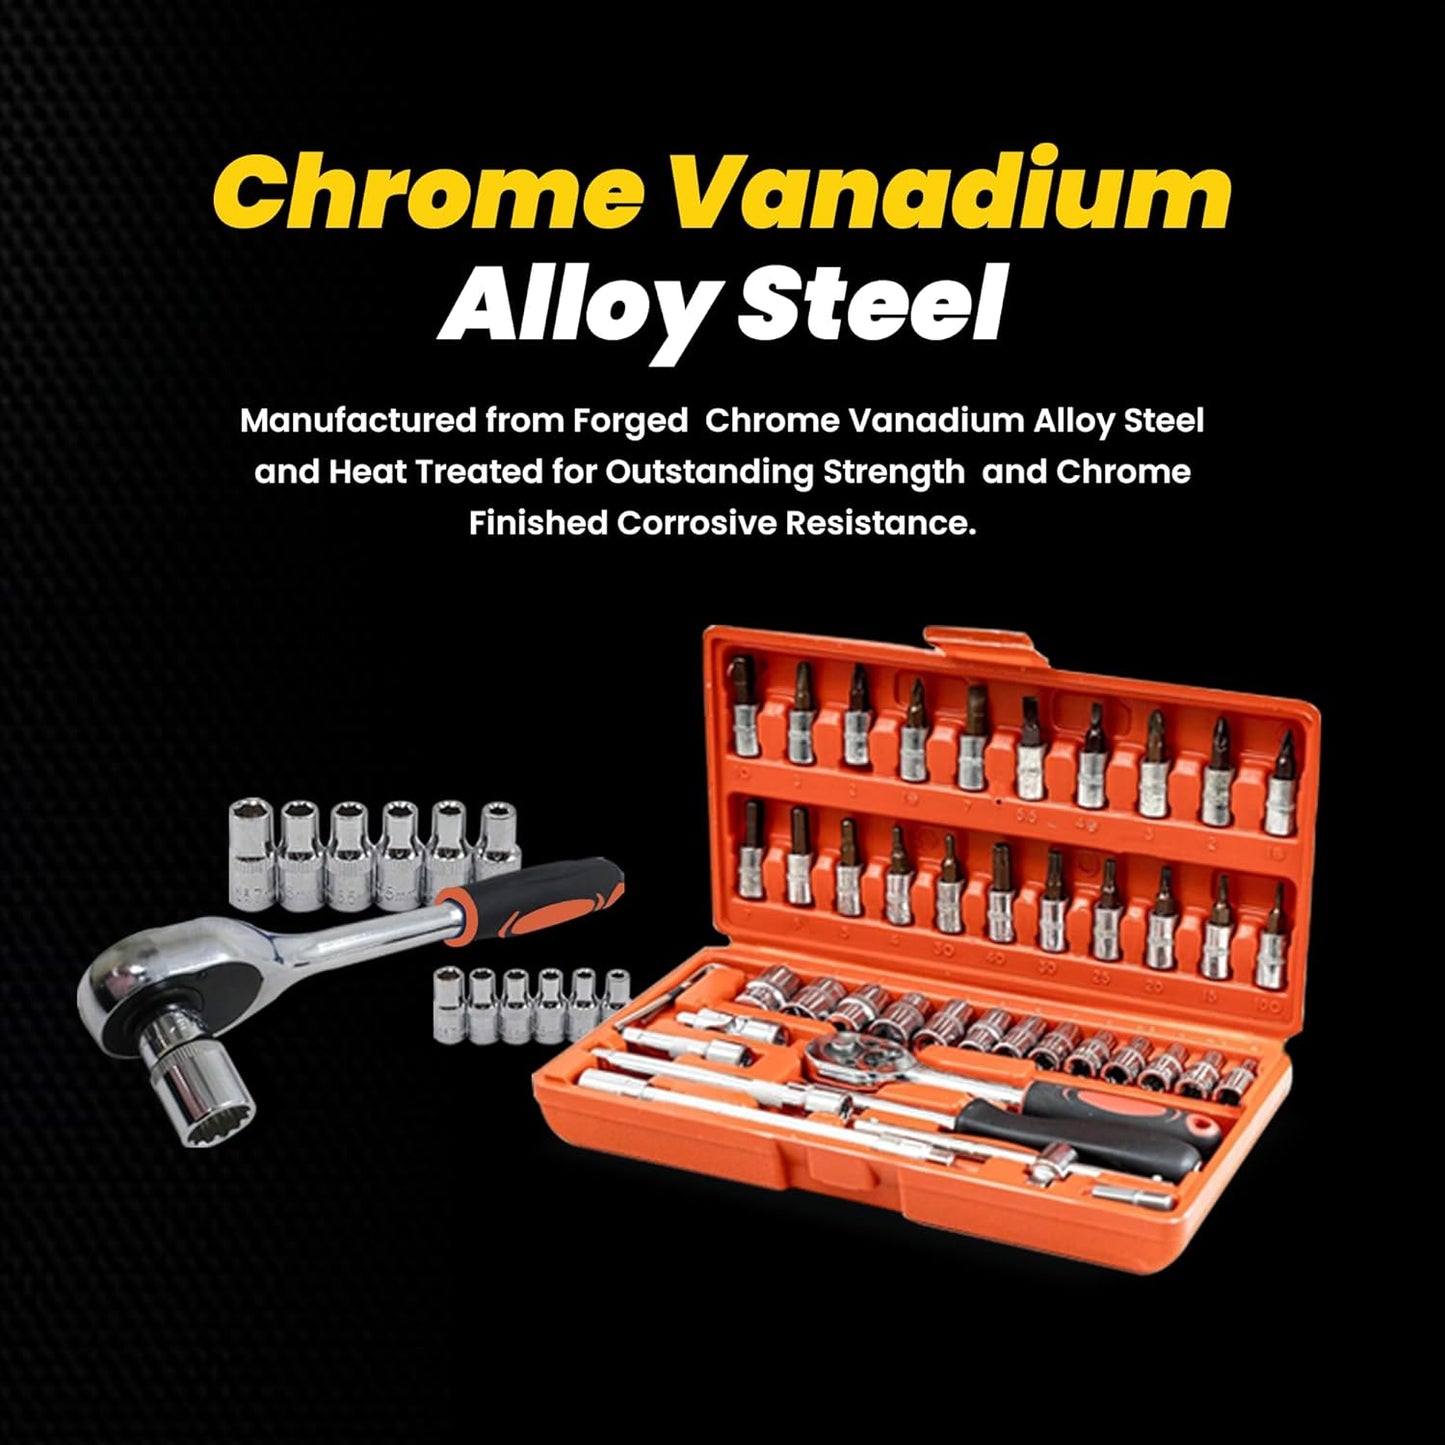 MAF Heavy Duty 1/4" Combinational Ratchet Socket Wrench Spanner 46 Pieces Chrome Vanadium Hand Tool Kit Set For Repairing Work, DIY, Auto Repairs Car & Bike (Assorted Colors)